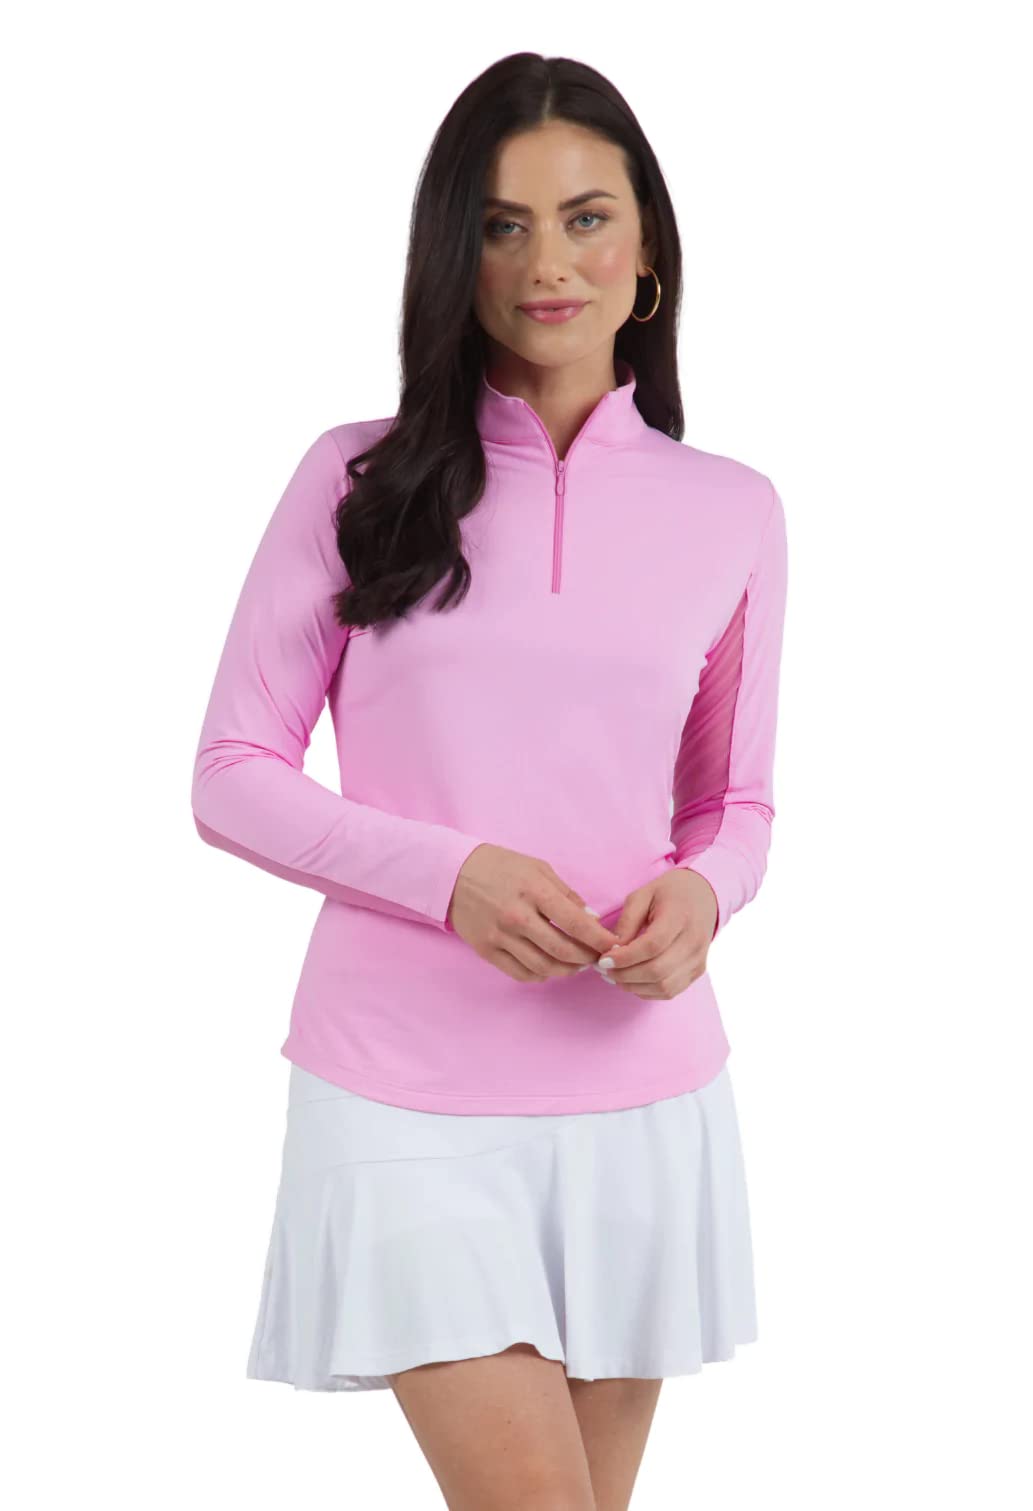 IBKUL Athleisure Wear Sun Protective UPF 50+ Icefil Cooling Tech Long Sleeve Mock Neck Top with Under Arm Mesh 80000 Candy Pink Solid XXL